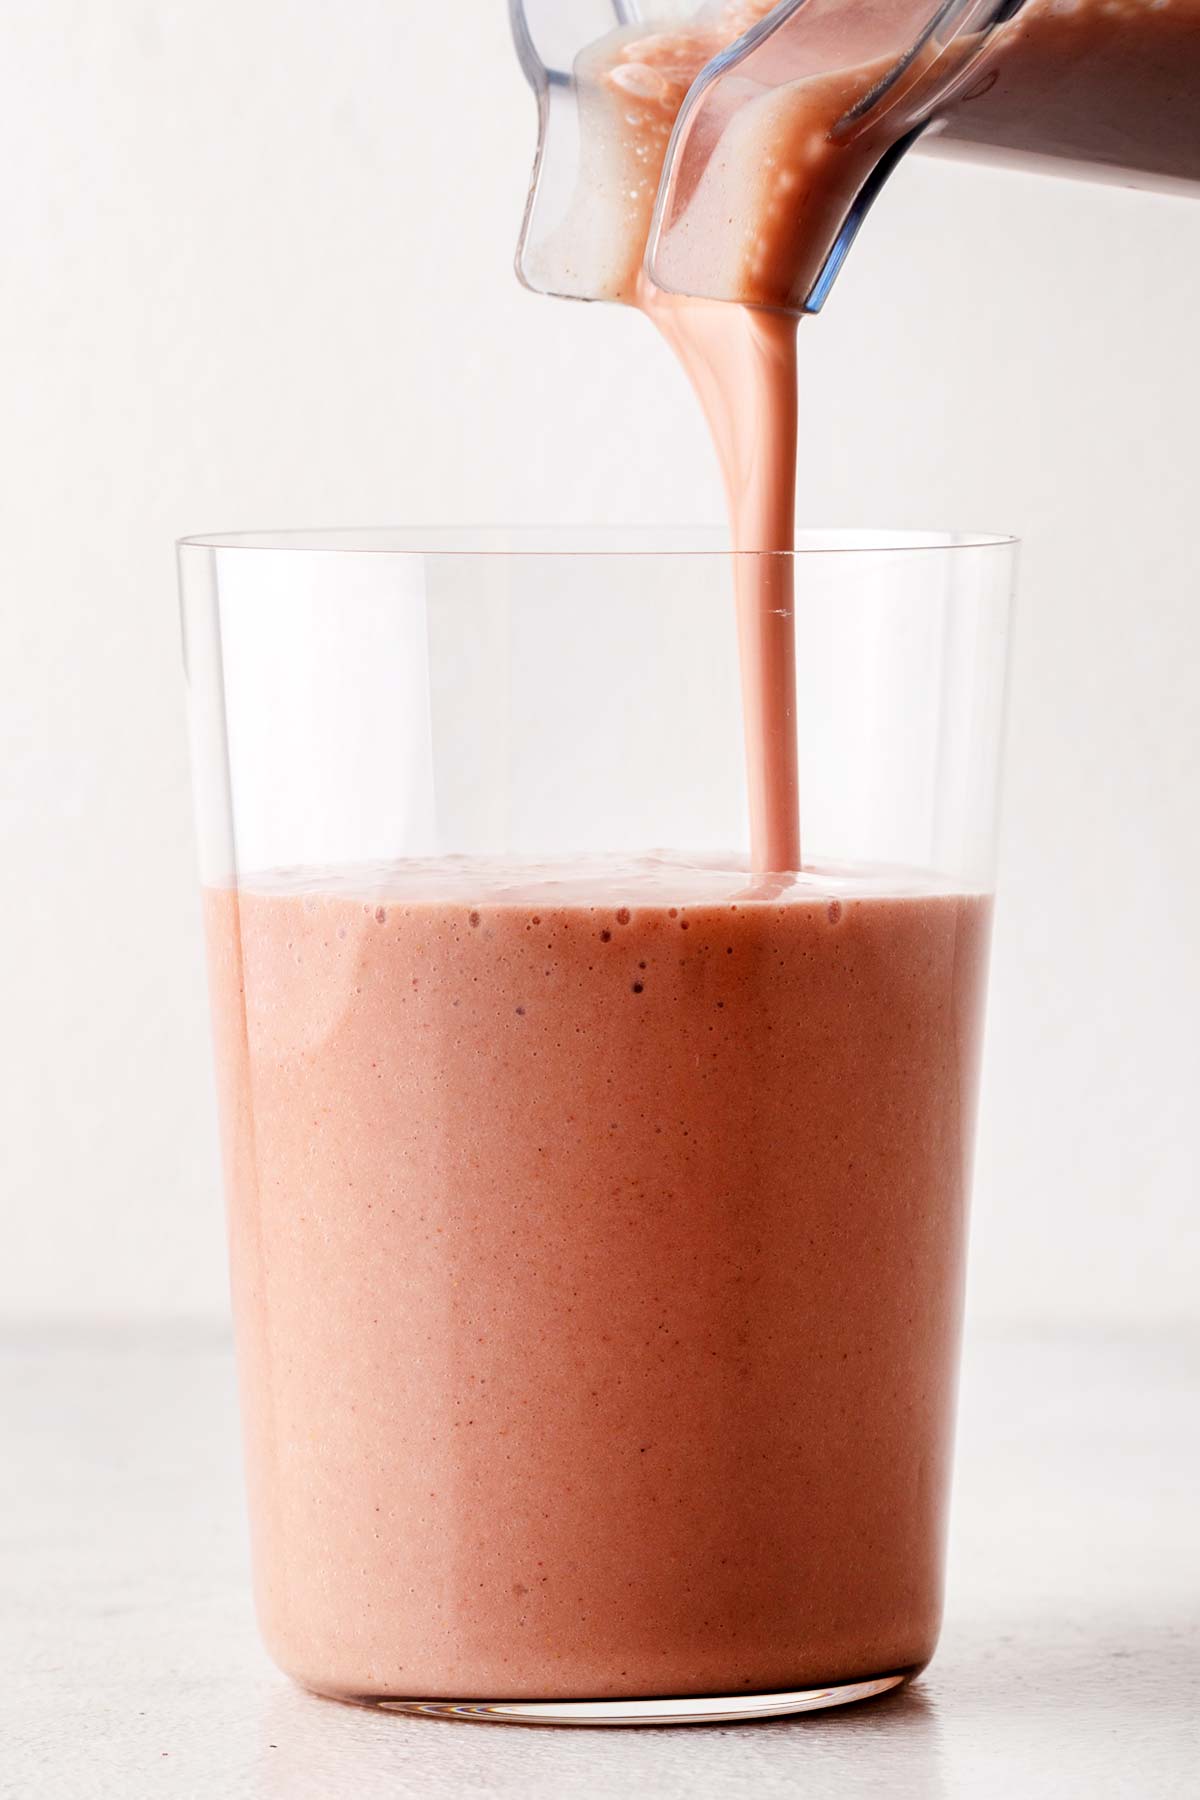 A strawberry banana protein shake being poured into a glass.